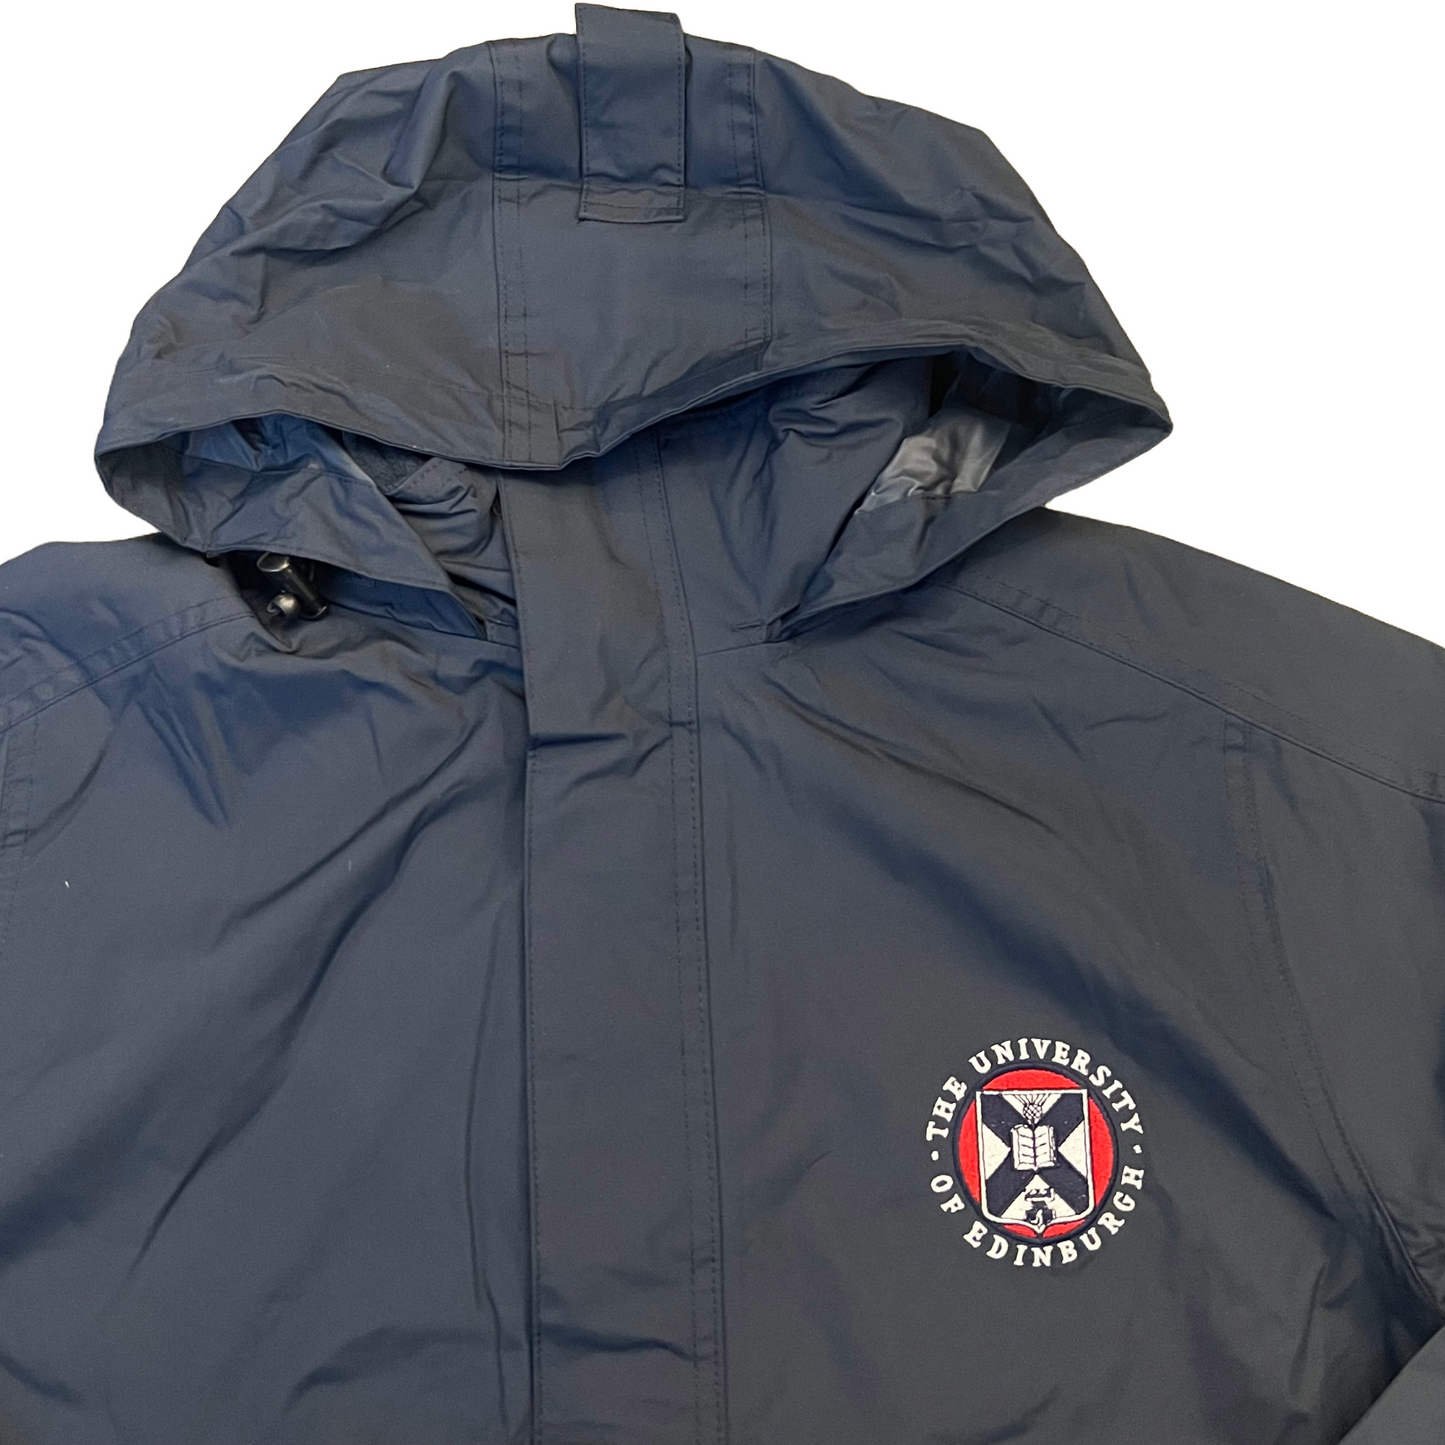 navy waterproof jacket with hood up,  with the University crest embroidered on the left chest in white, red and navy 